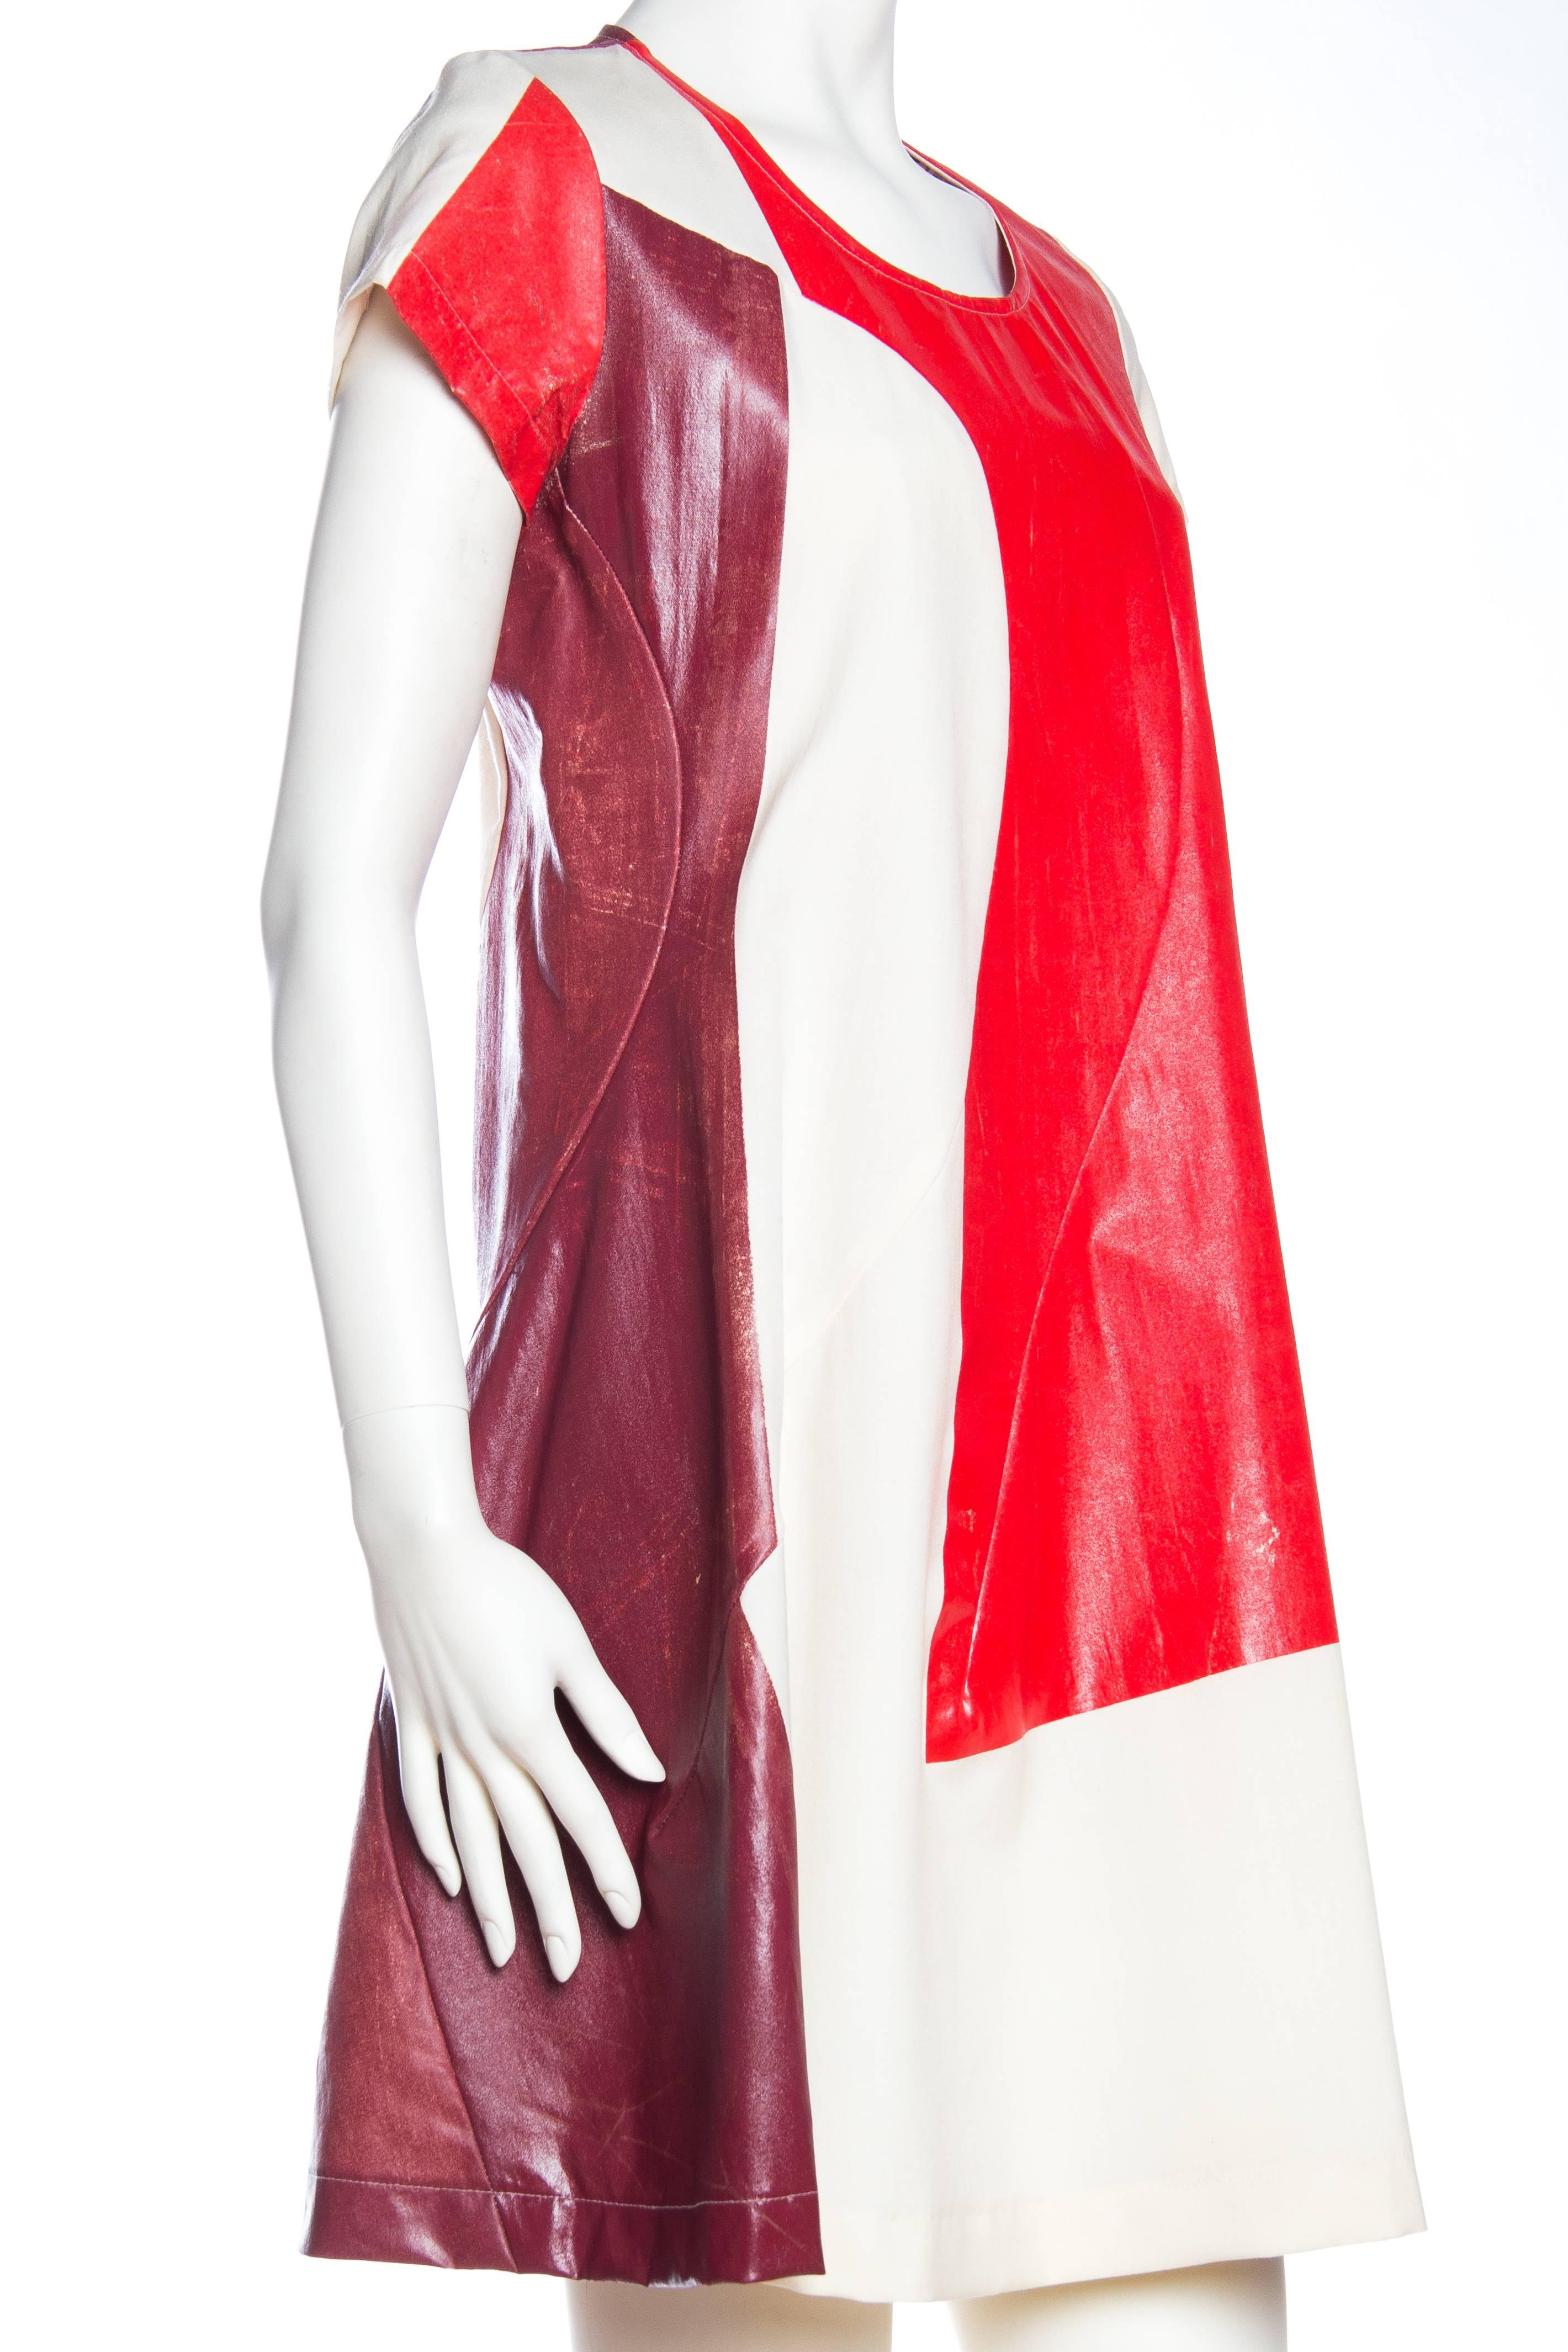 1990S COMME DES GARCONS Red & White Cotton Hand-Painted Patchwork Muslin Dress  In Excellent Condition For Sale In New York, NY